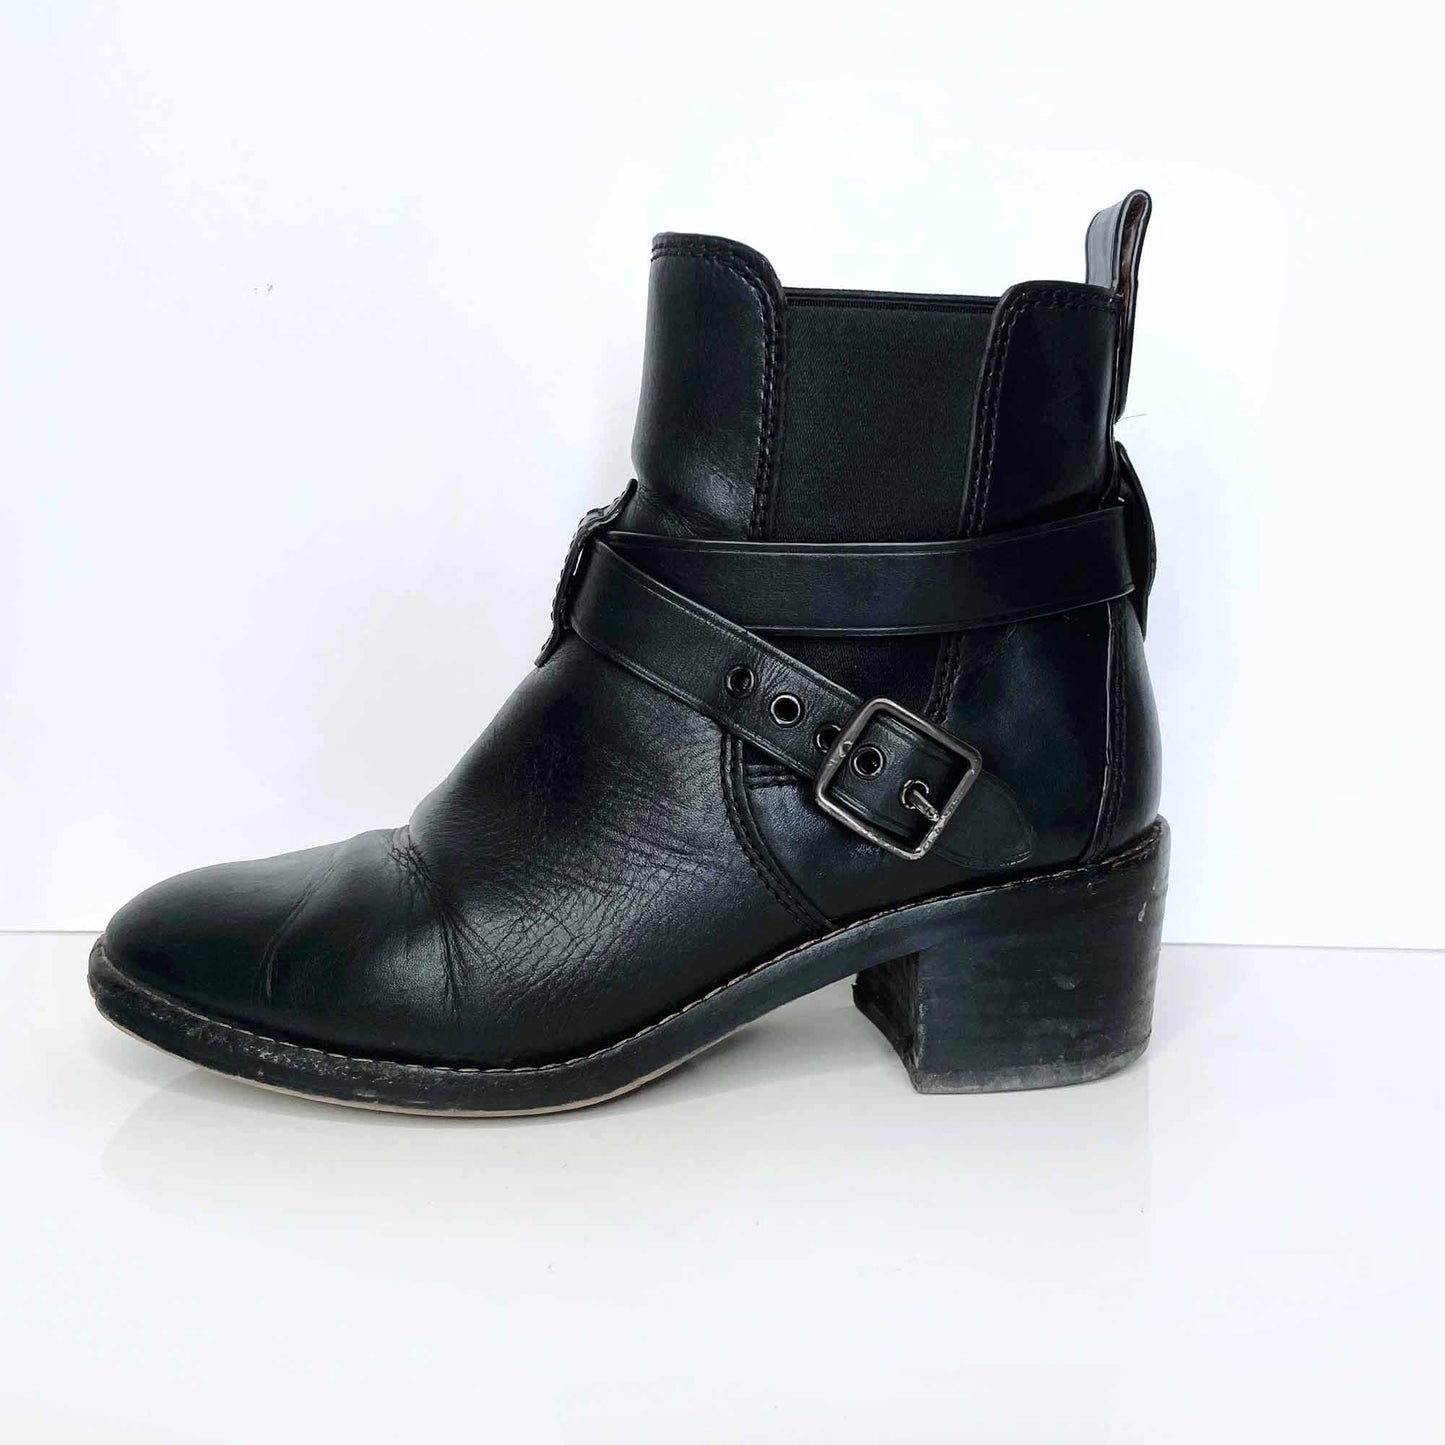 coach black leather harness chelsea boots - size 6.5